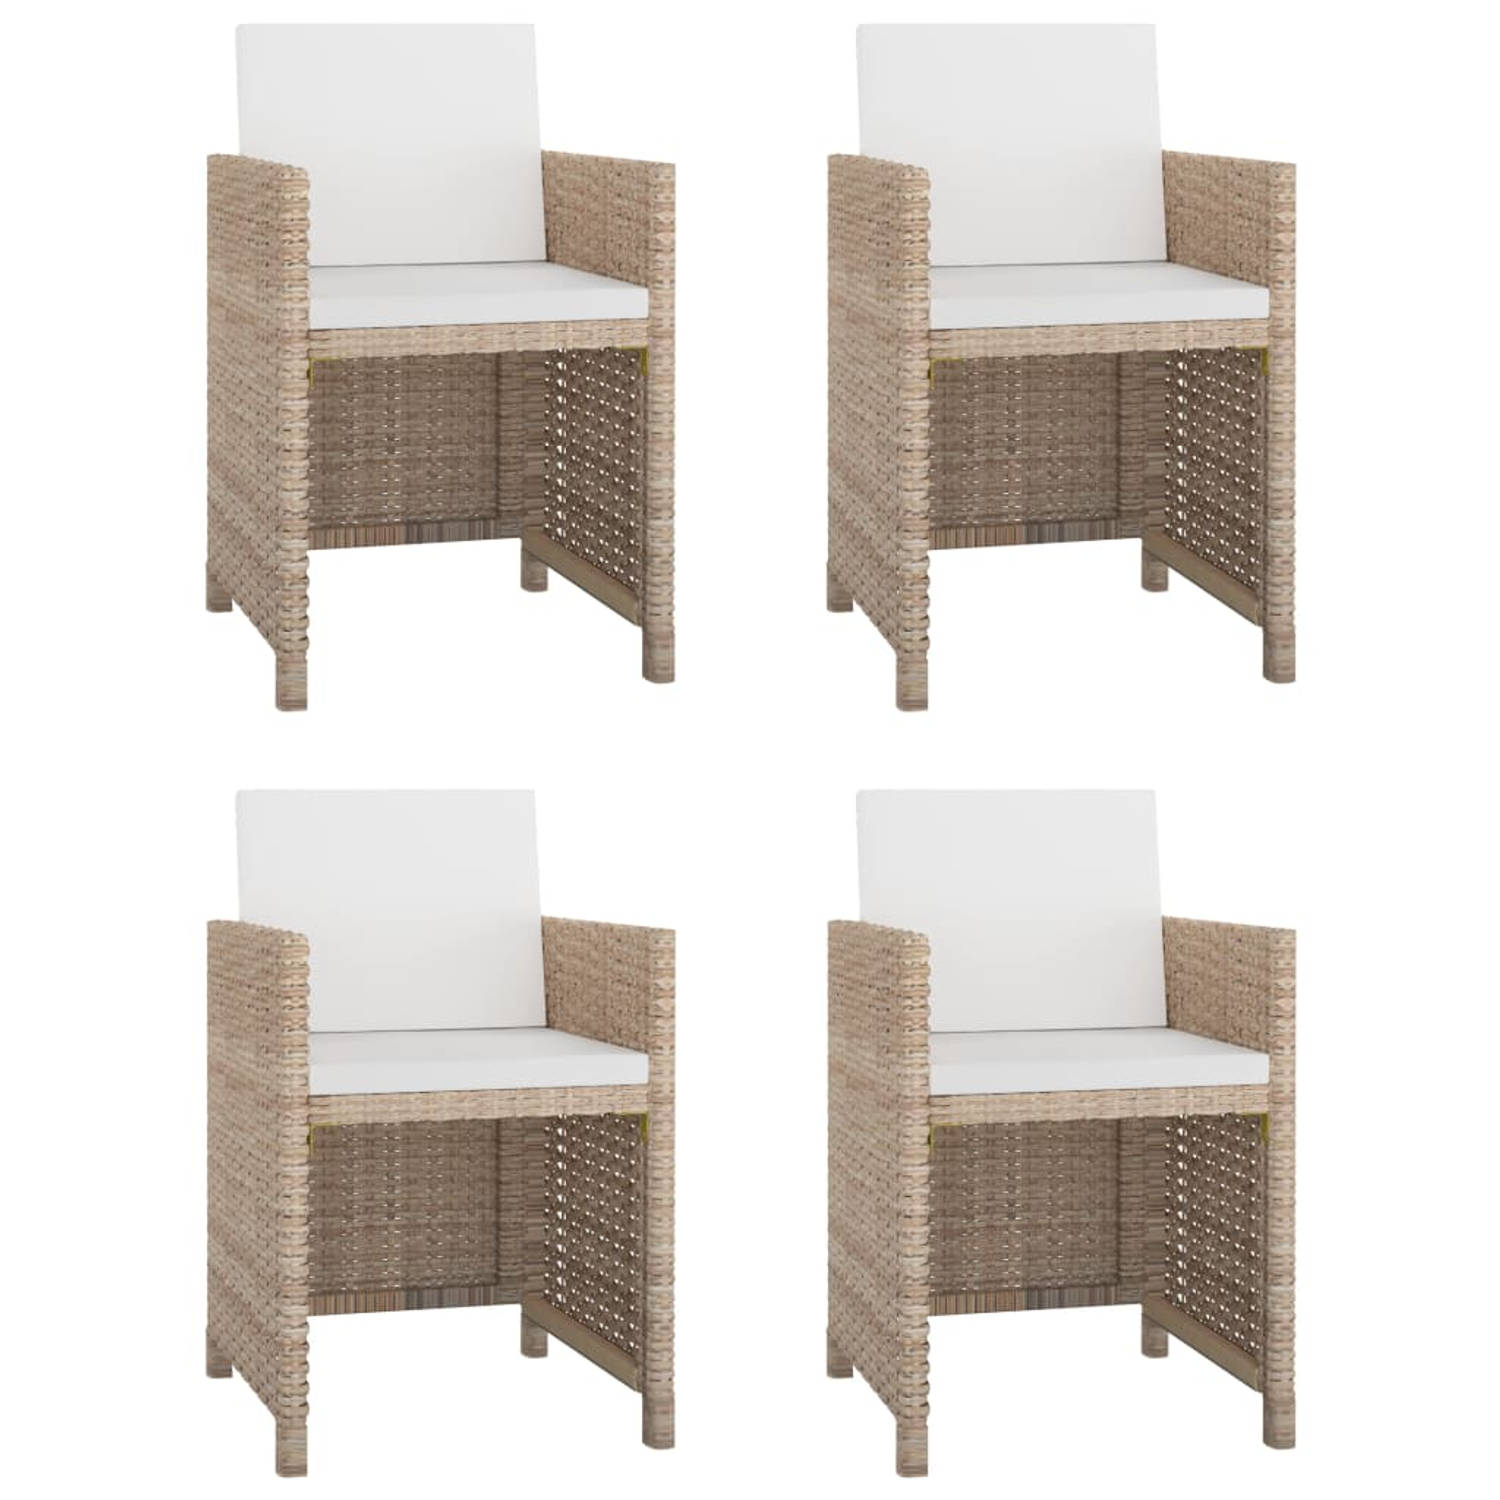 The Living Store 5-delige Tuinset met kussens poly rattan beige - Tuinset